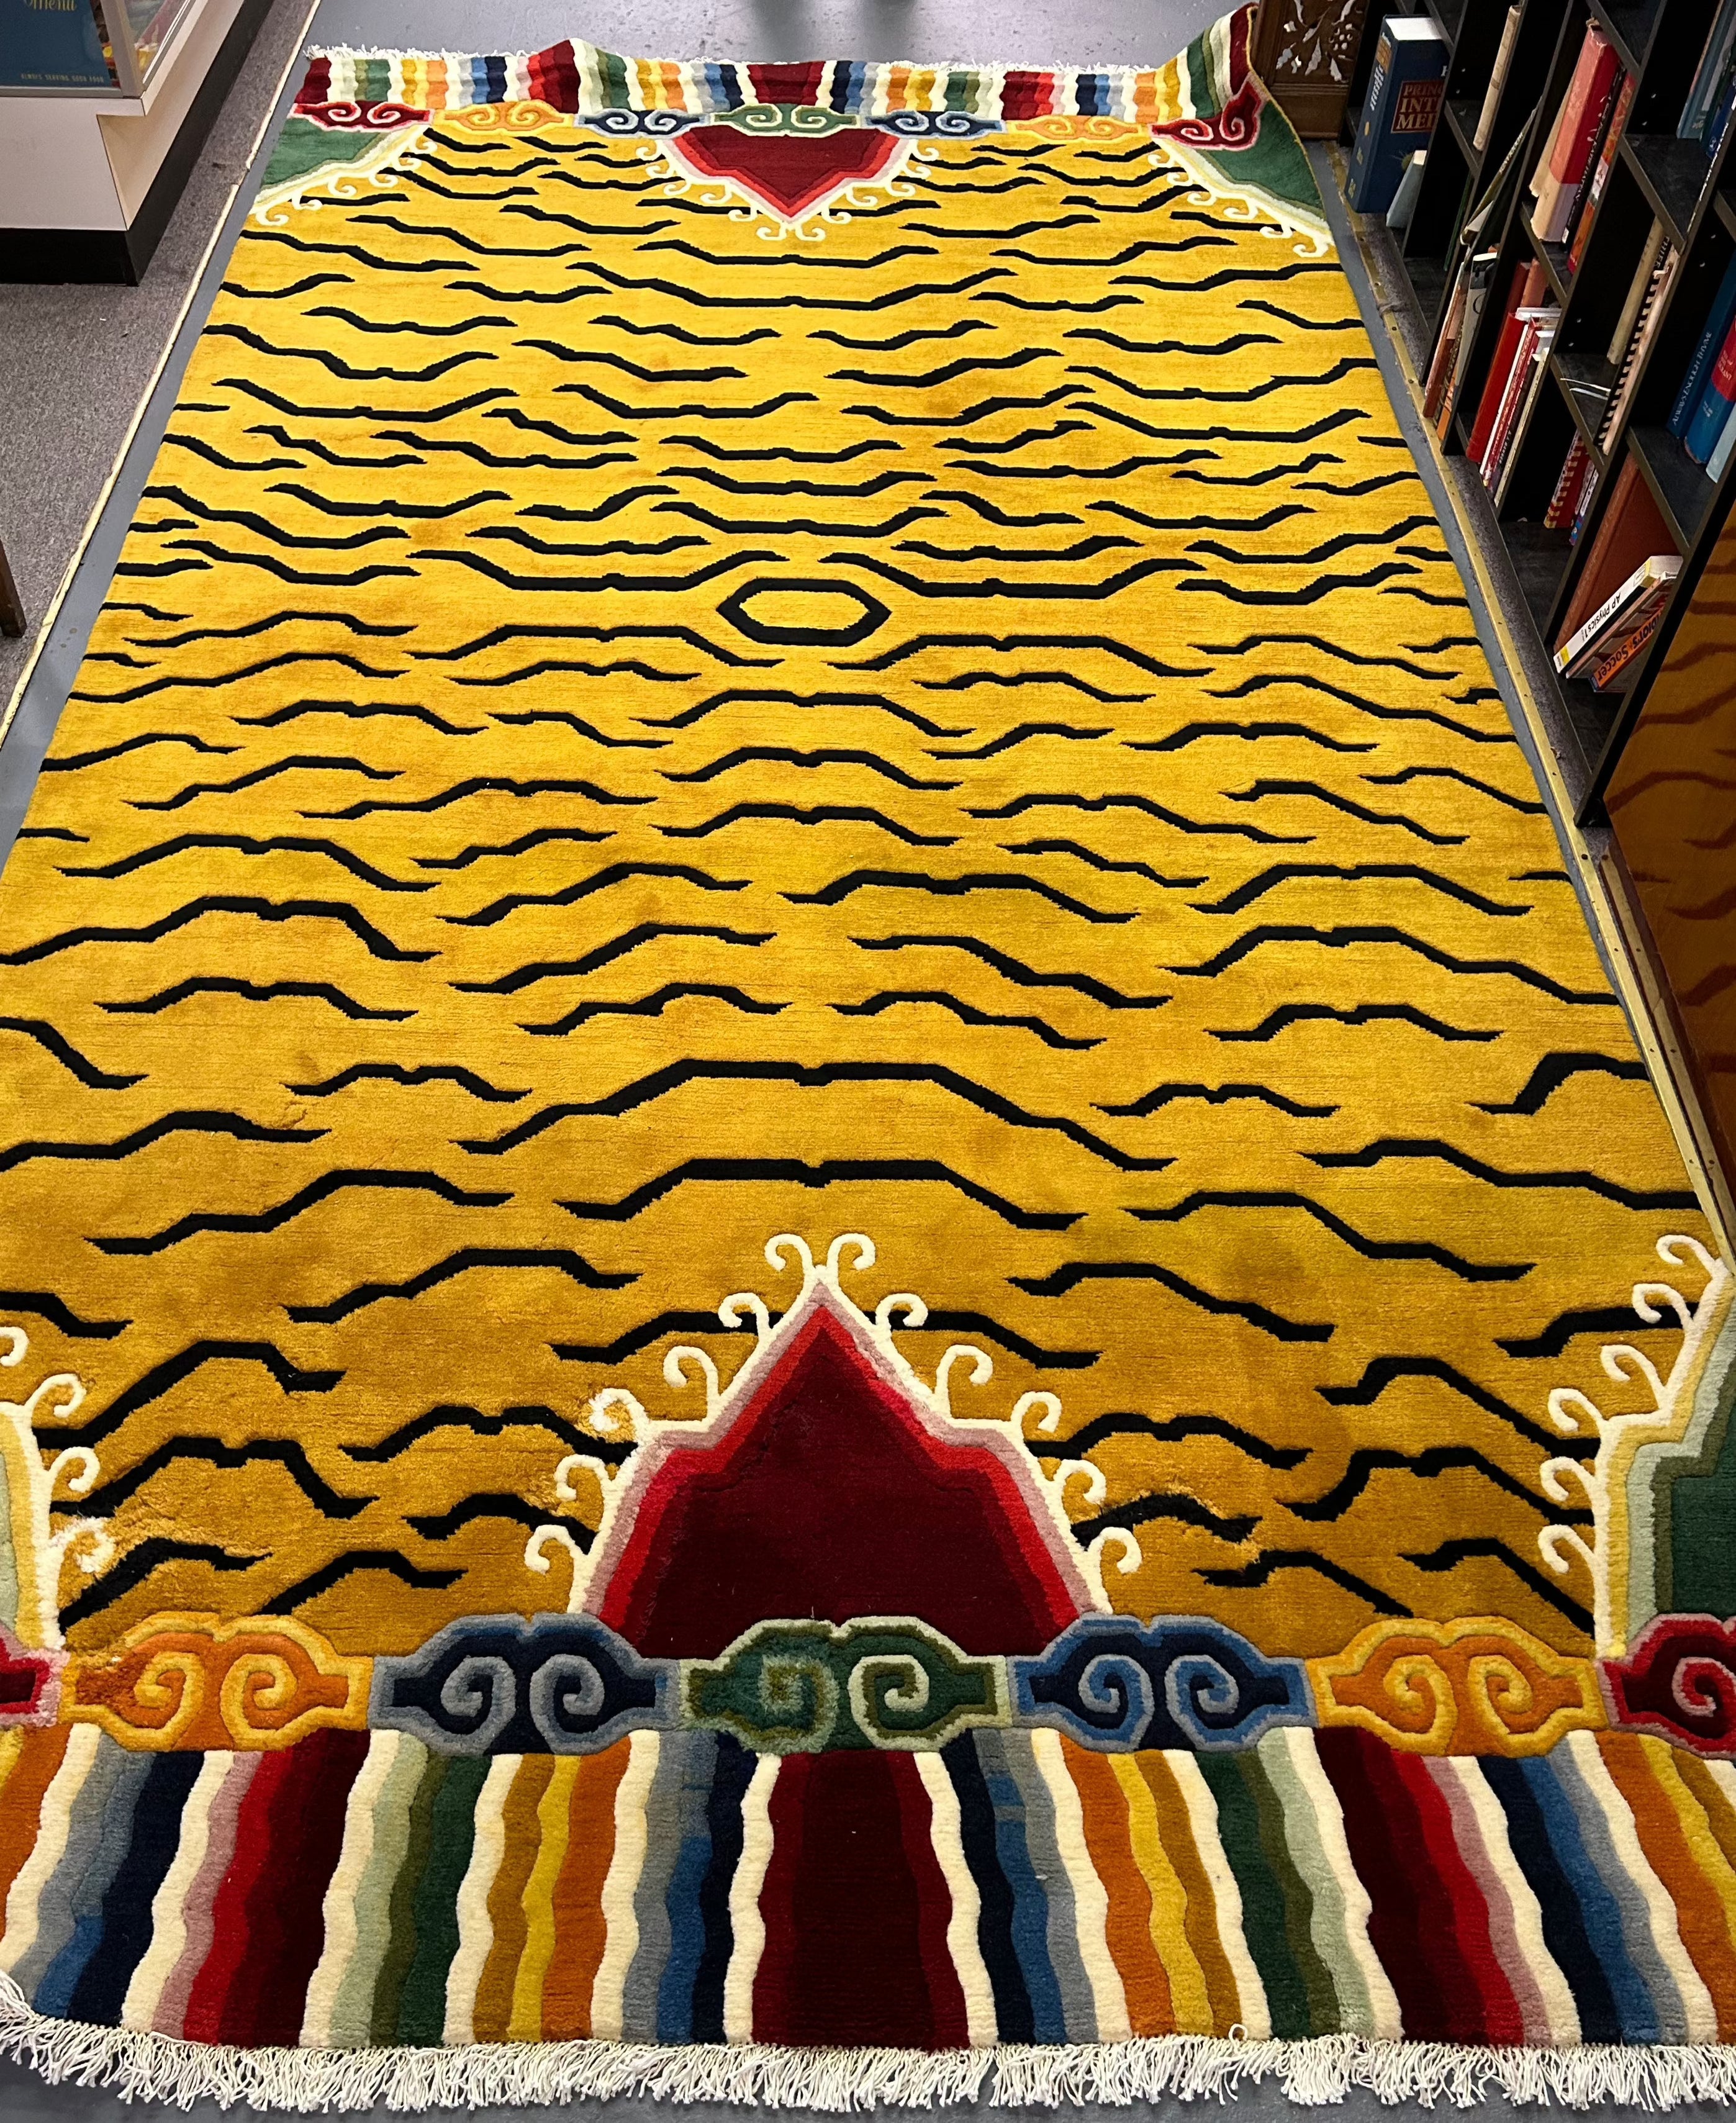 Handwoven Tibetan wool rug with a colorful mountain scene on either end of the rug with a semi flowing-geometric tiger inspired design in the middle.